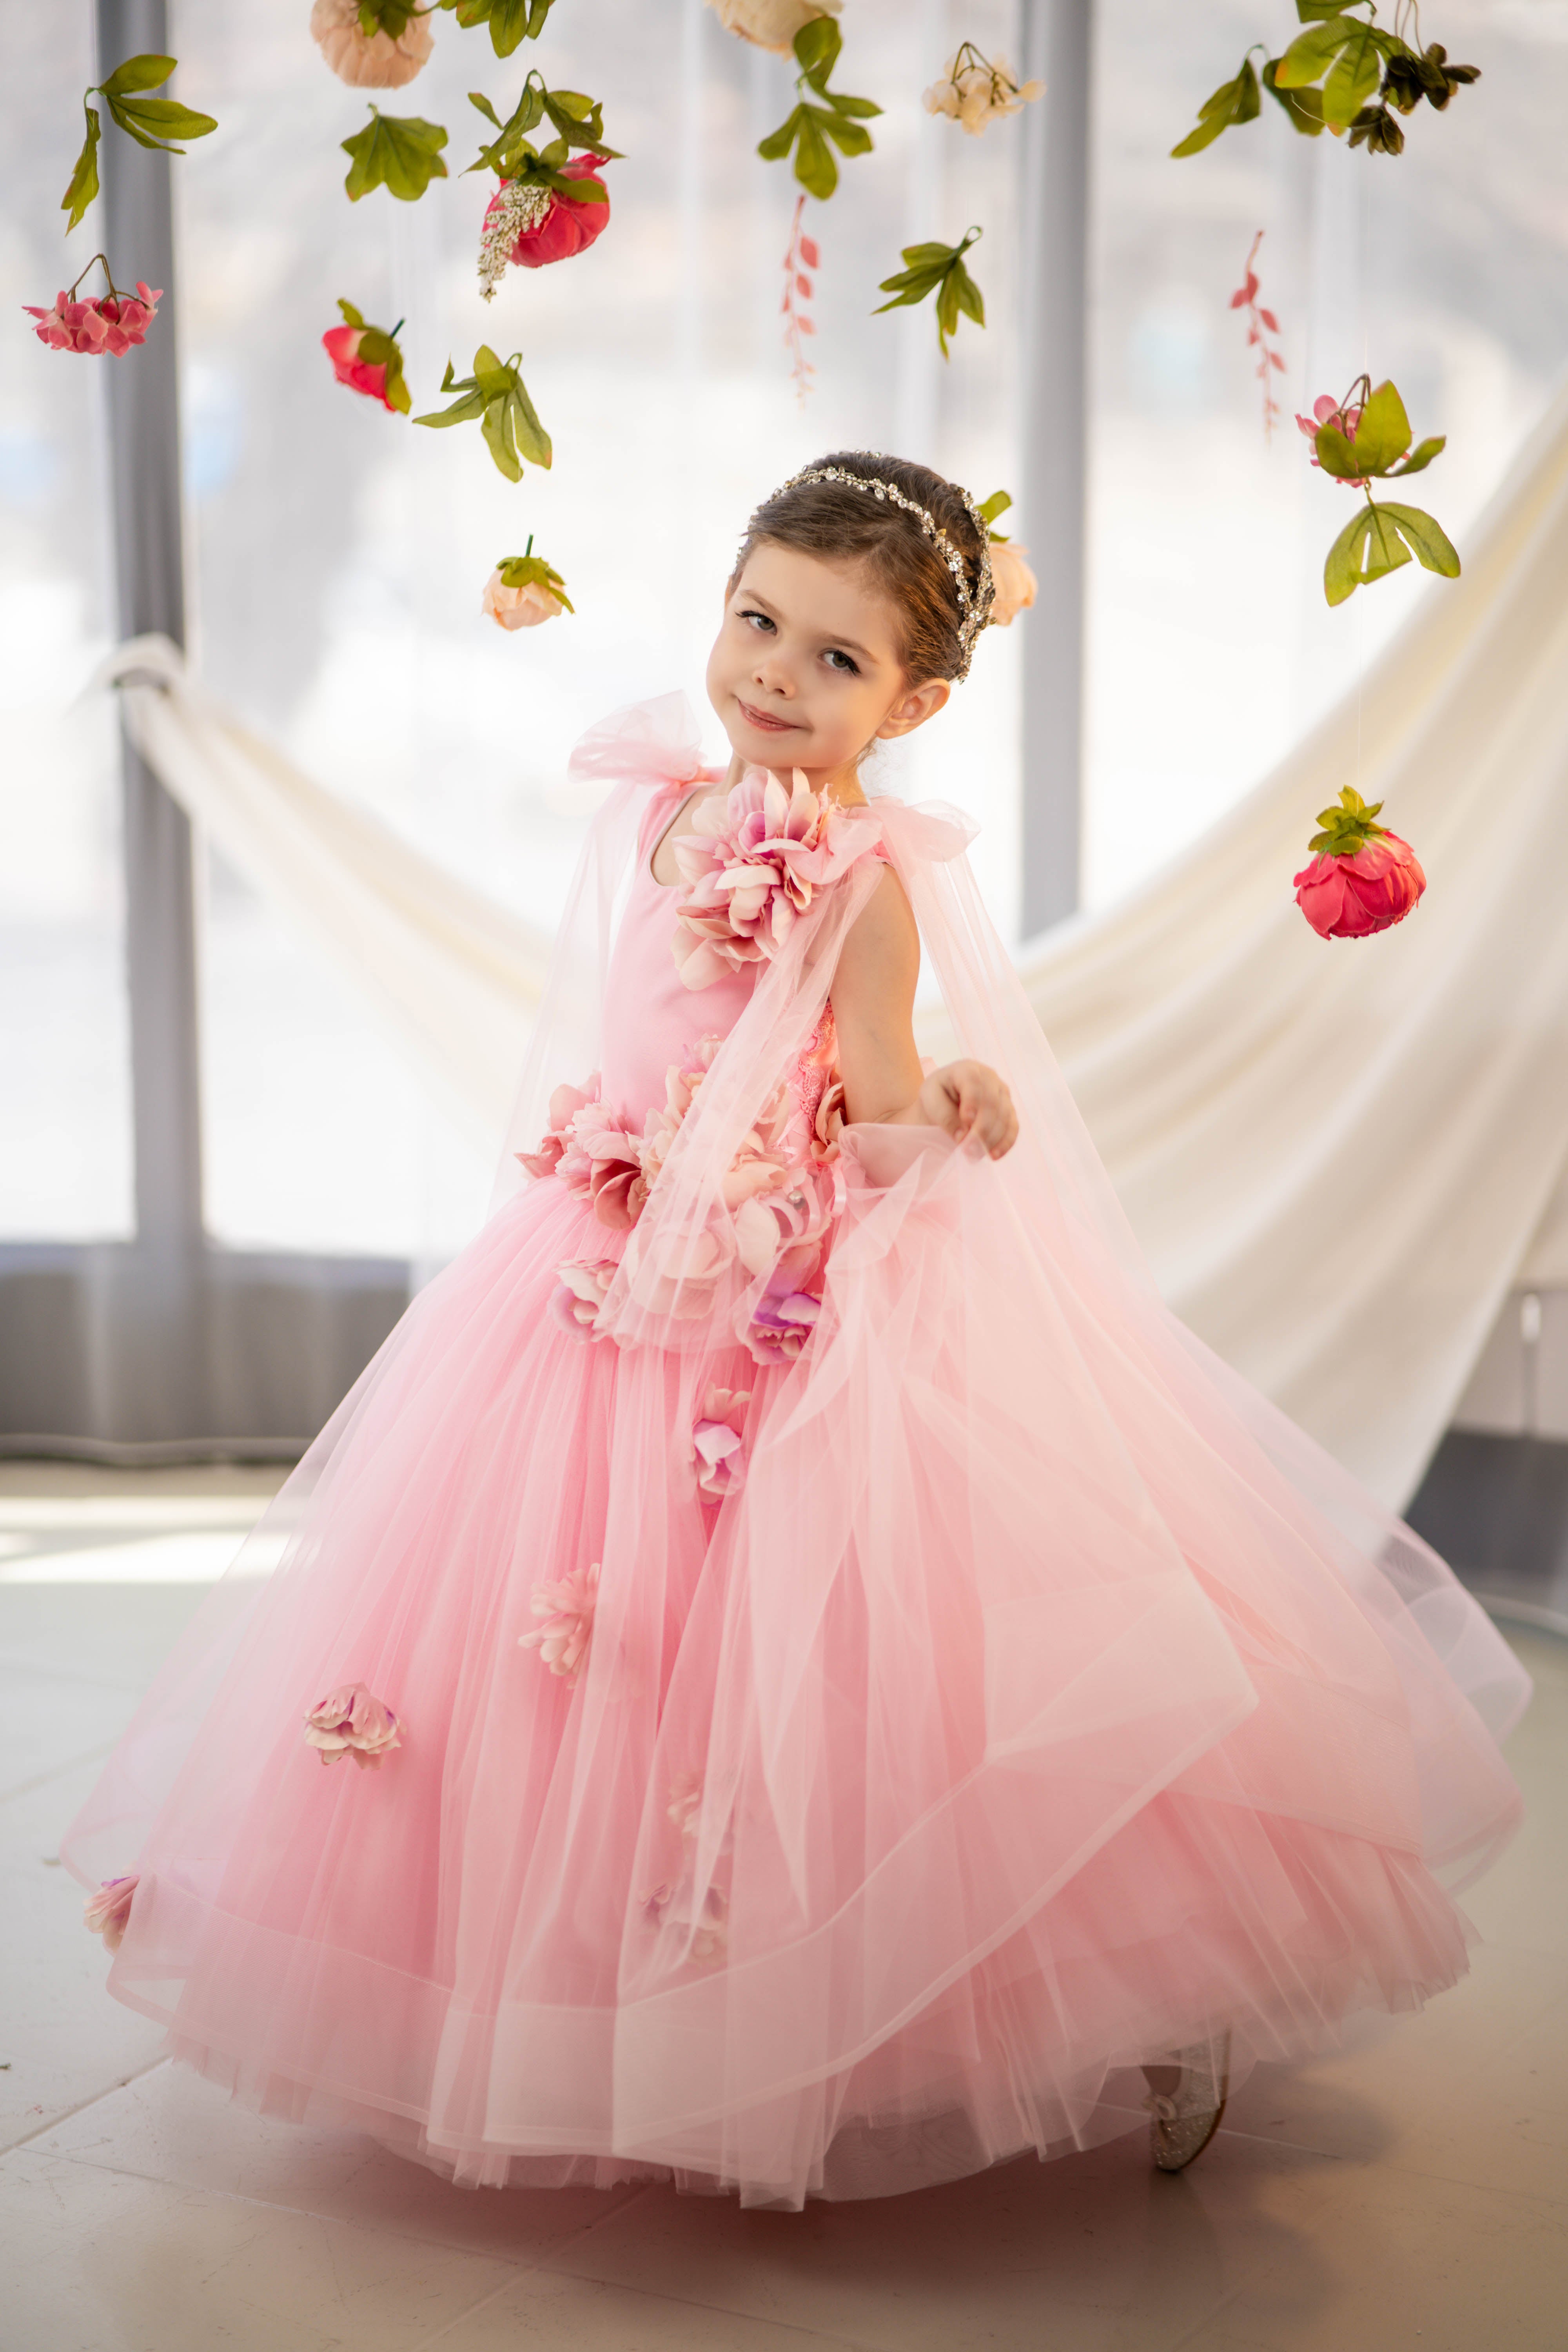 "Flower" Gown For Girls (Multiple Colors)